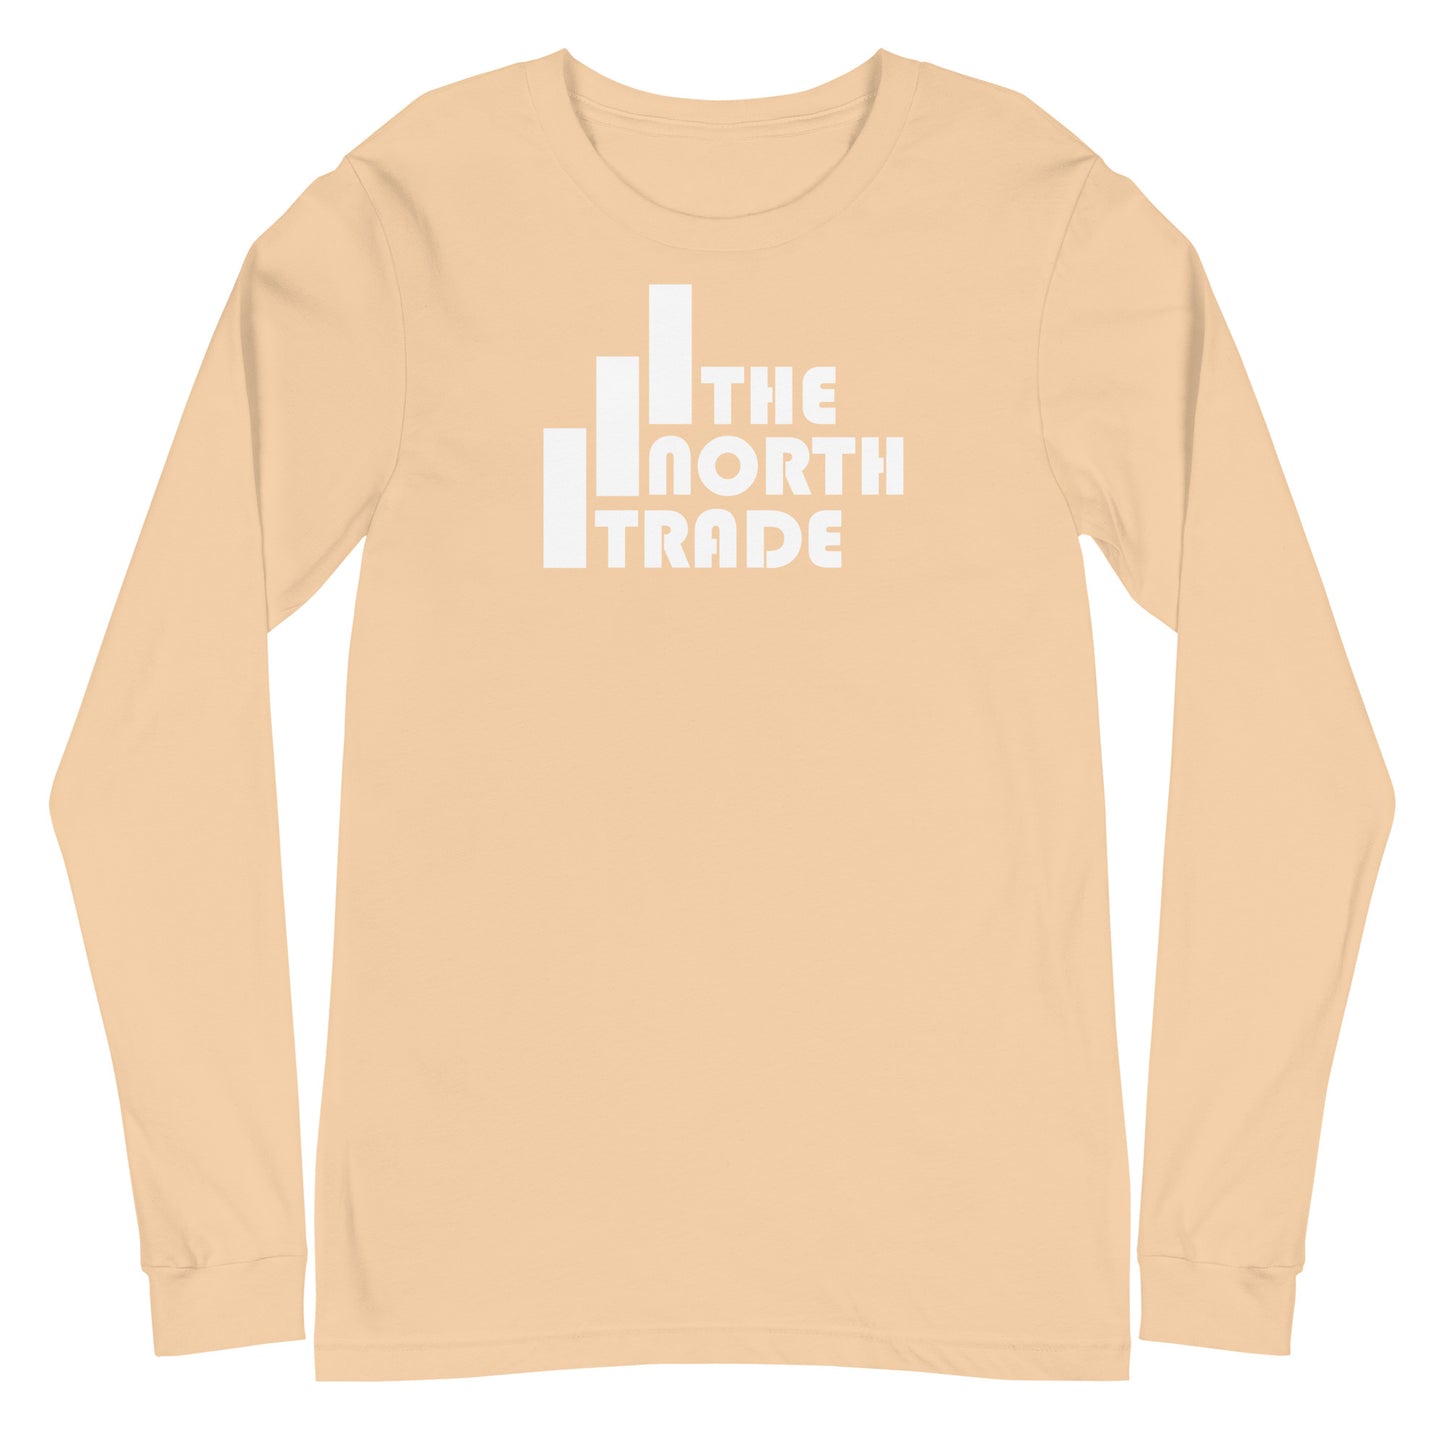 The North Trade Men's Long Sleeve Tee